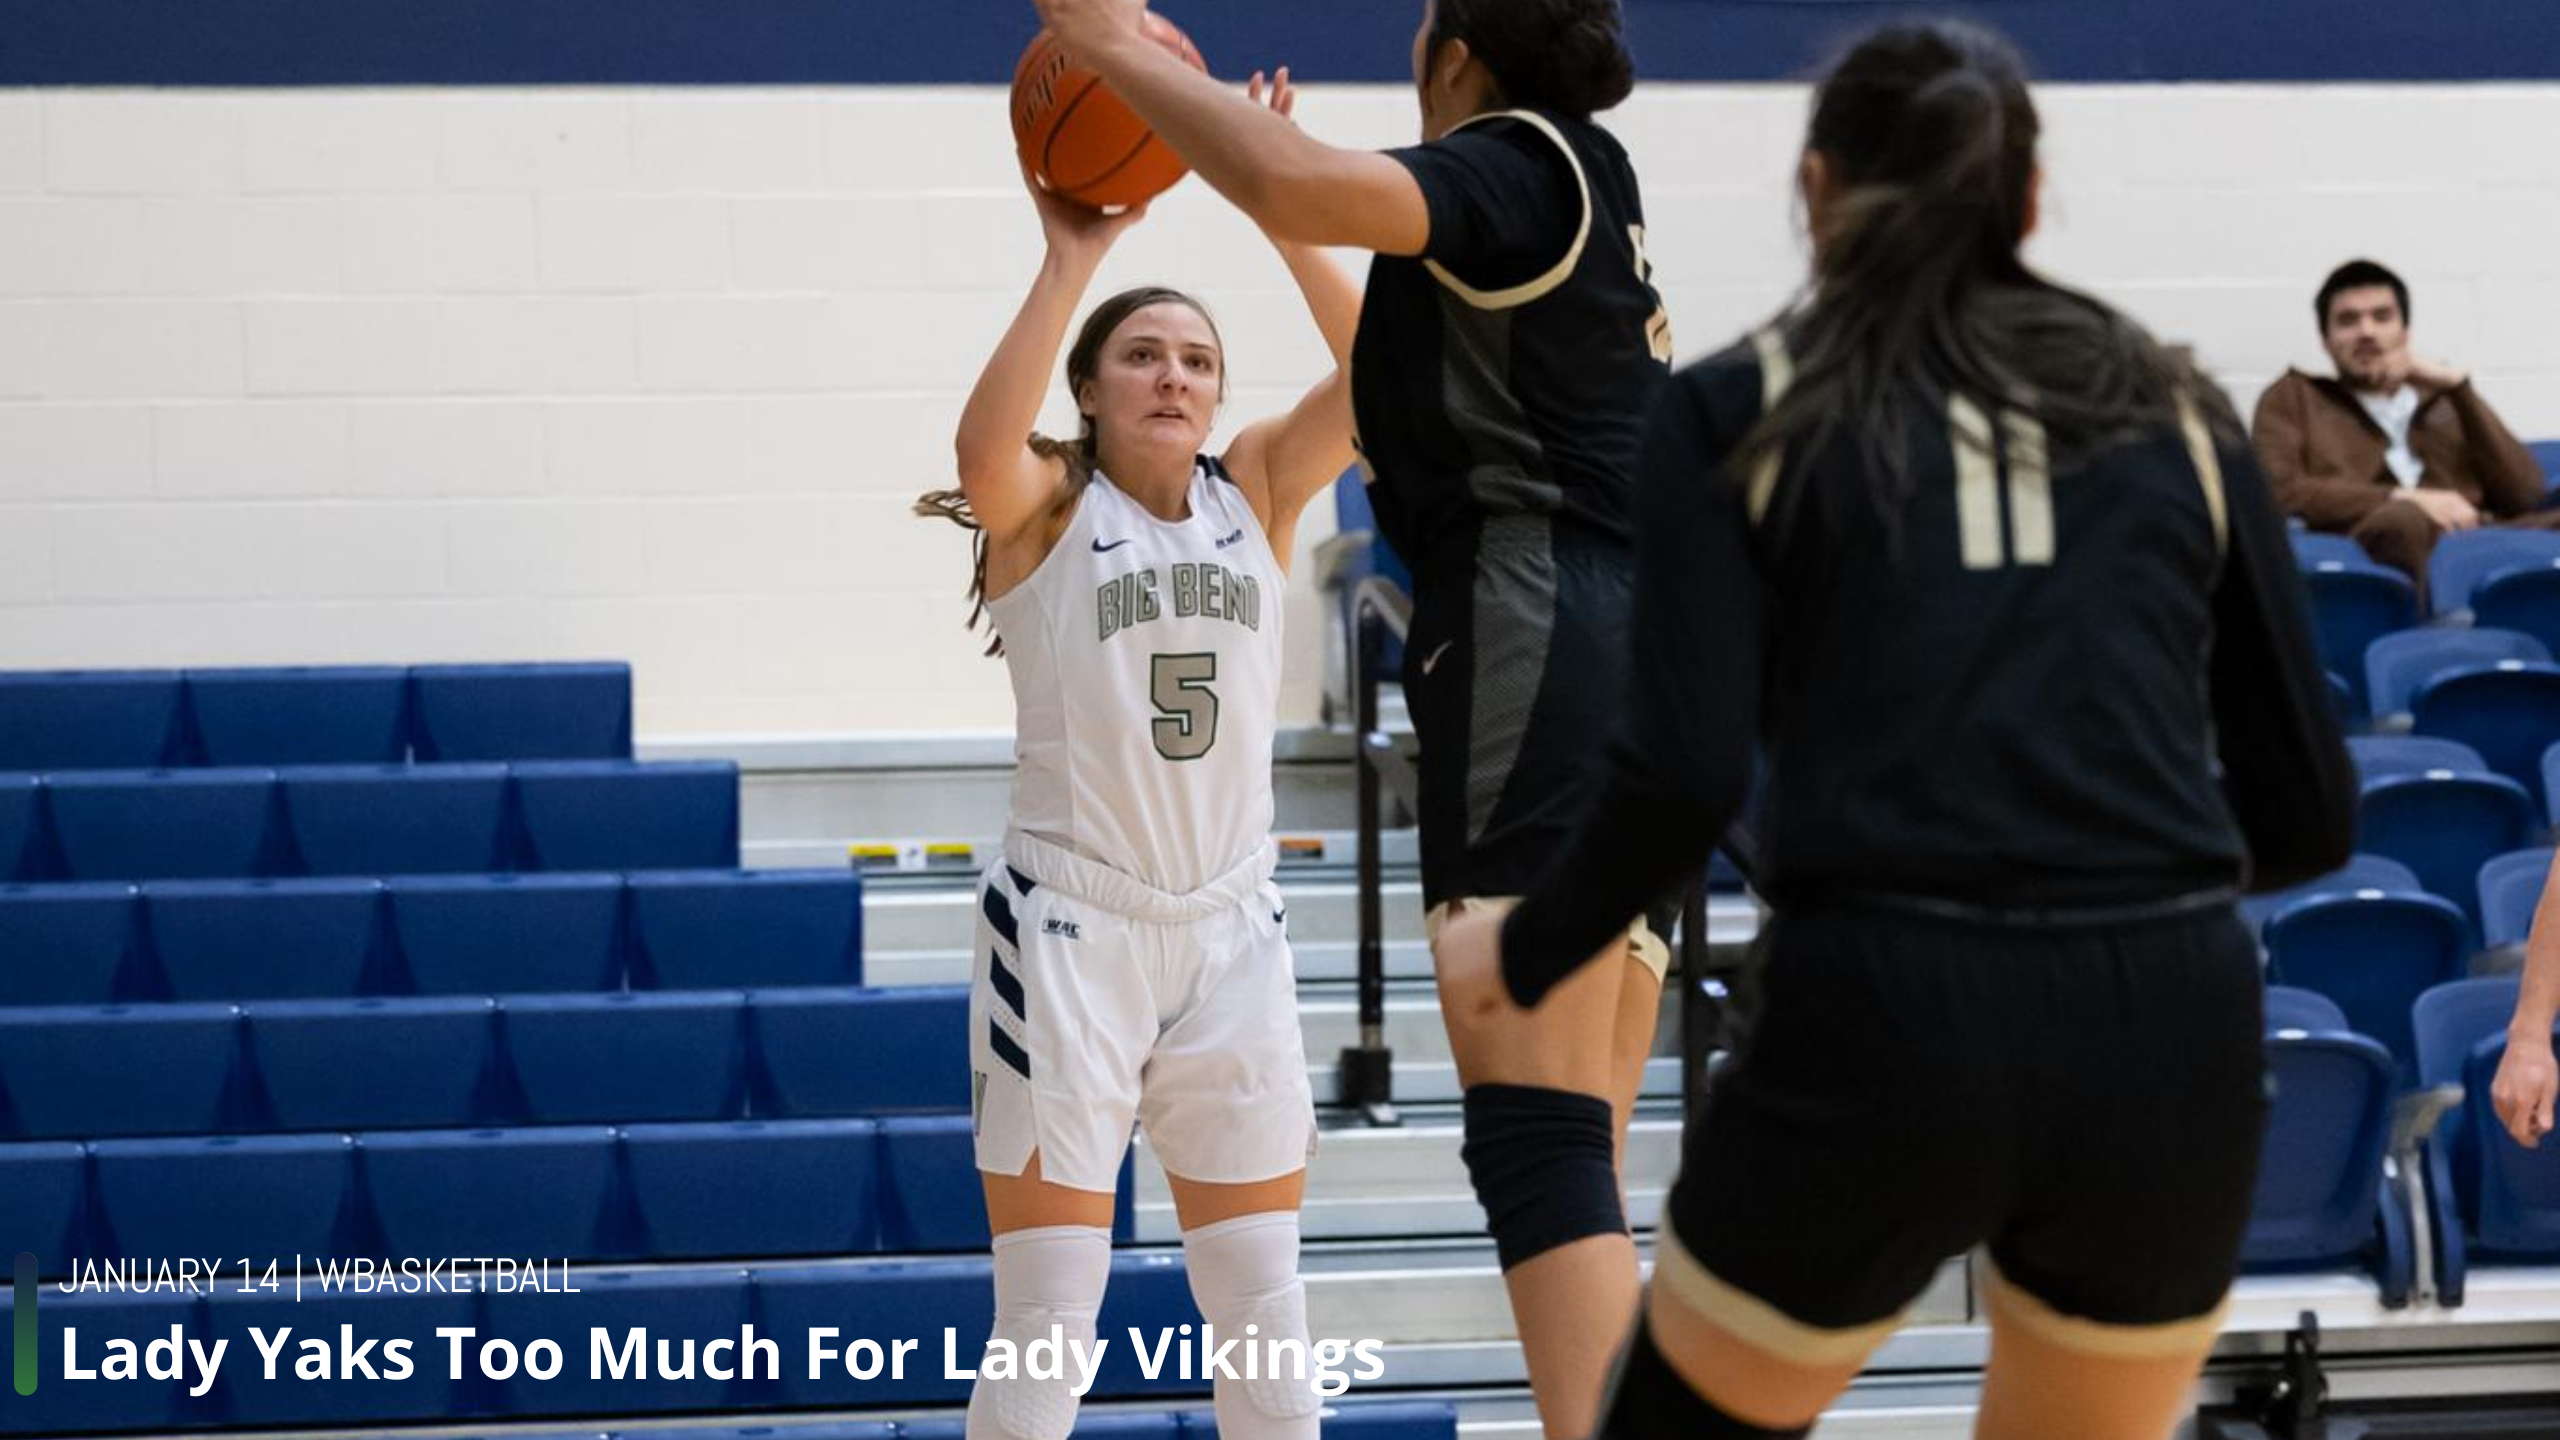 Lady Yaks Too Much For Lady Vikings